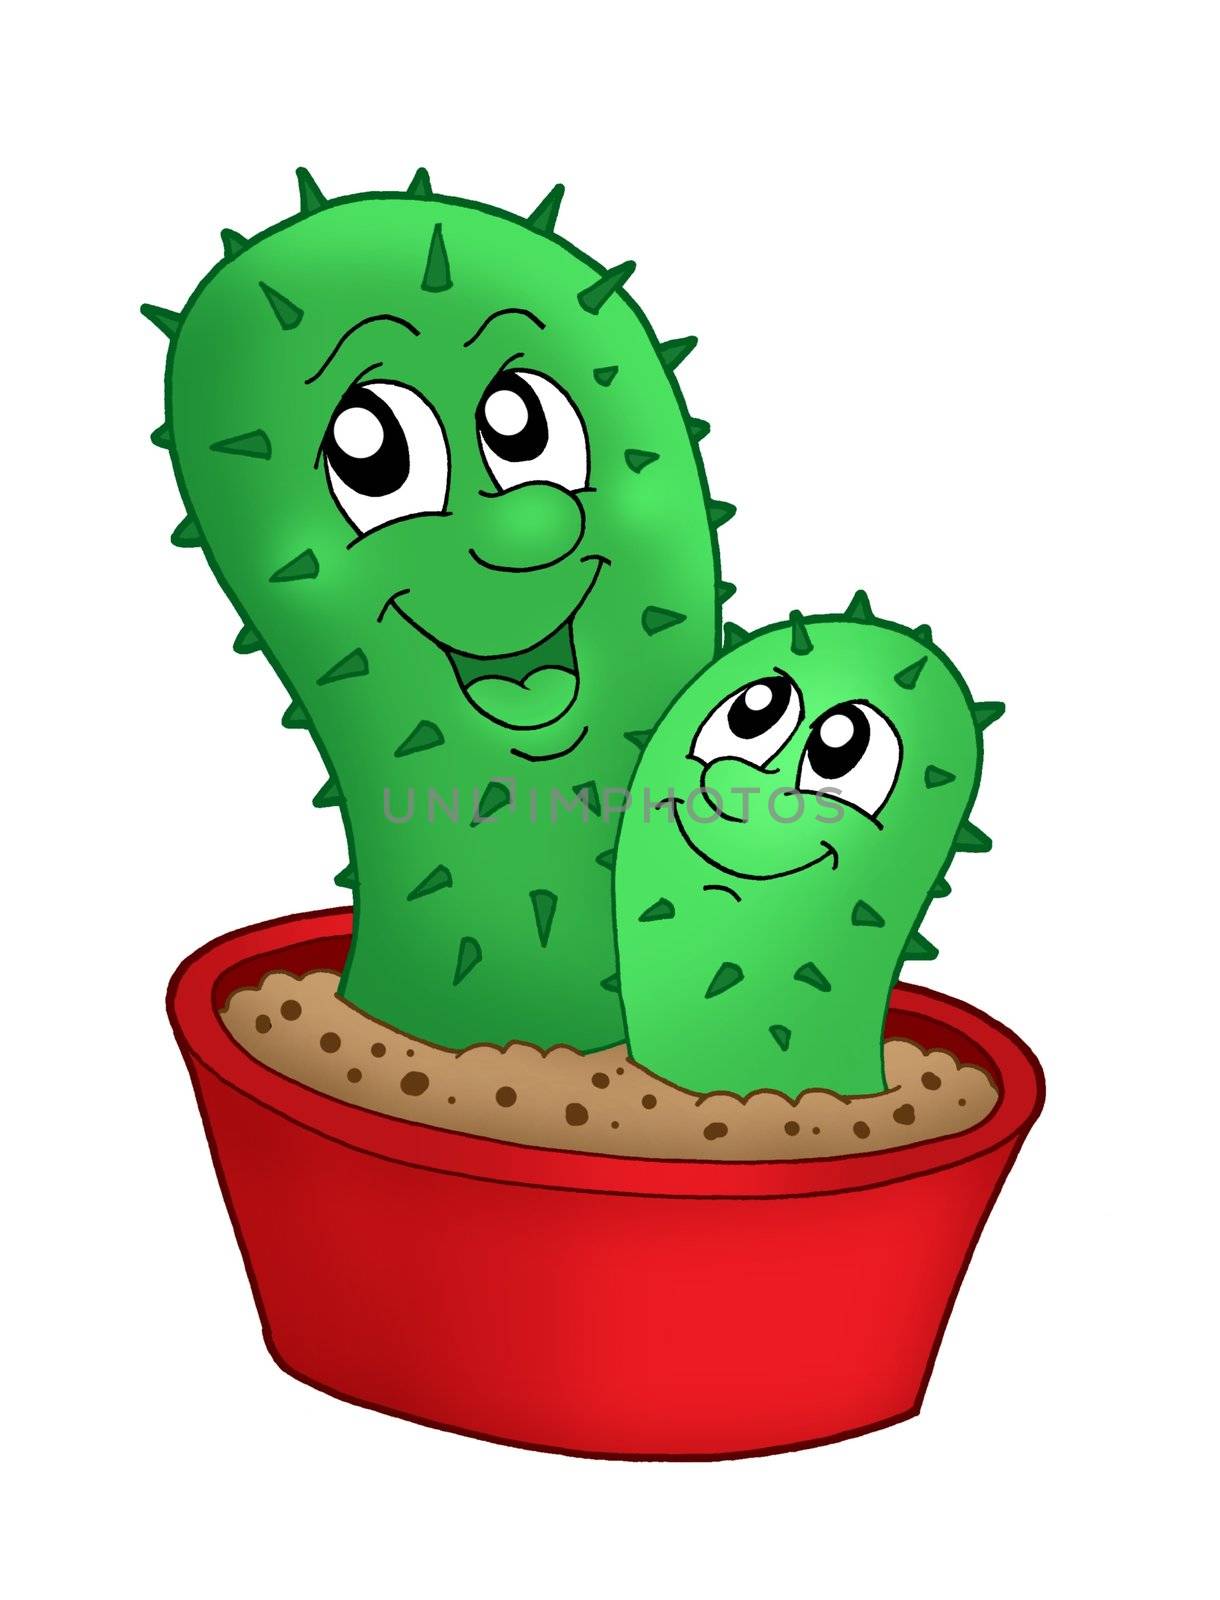 Pair of cactuses by clairev